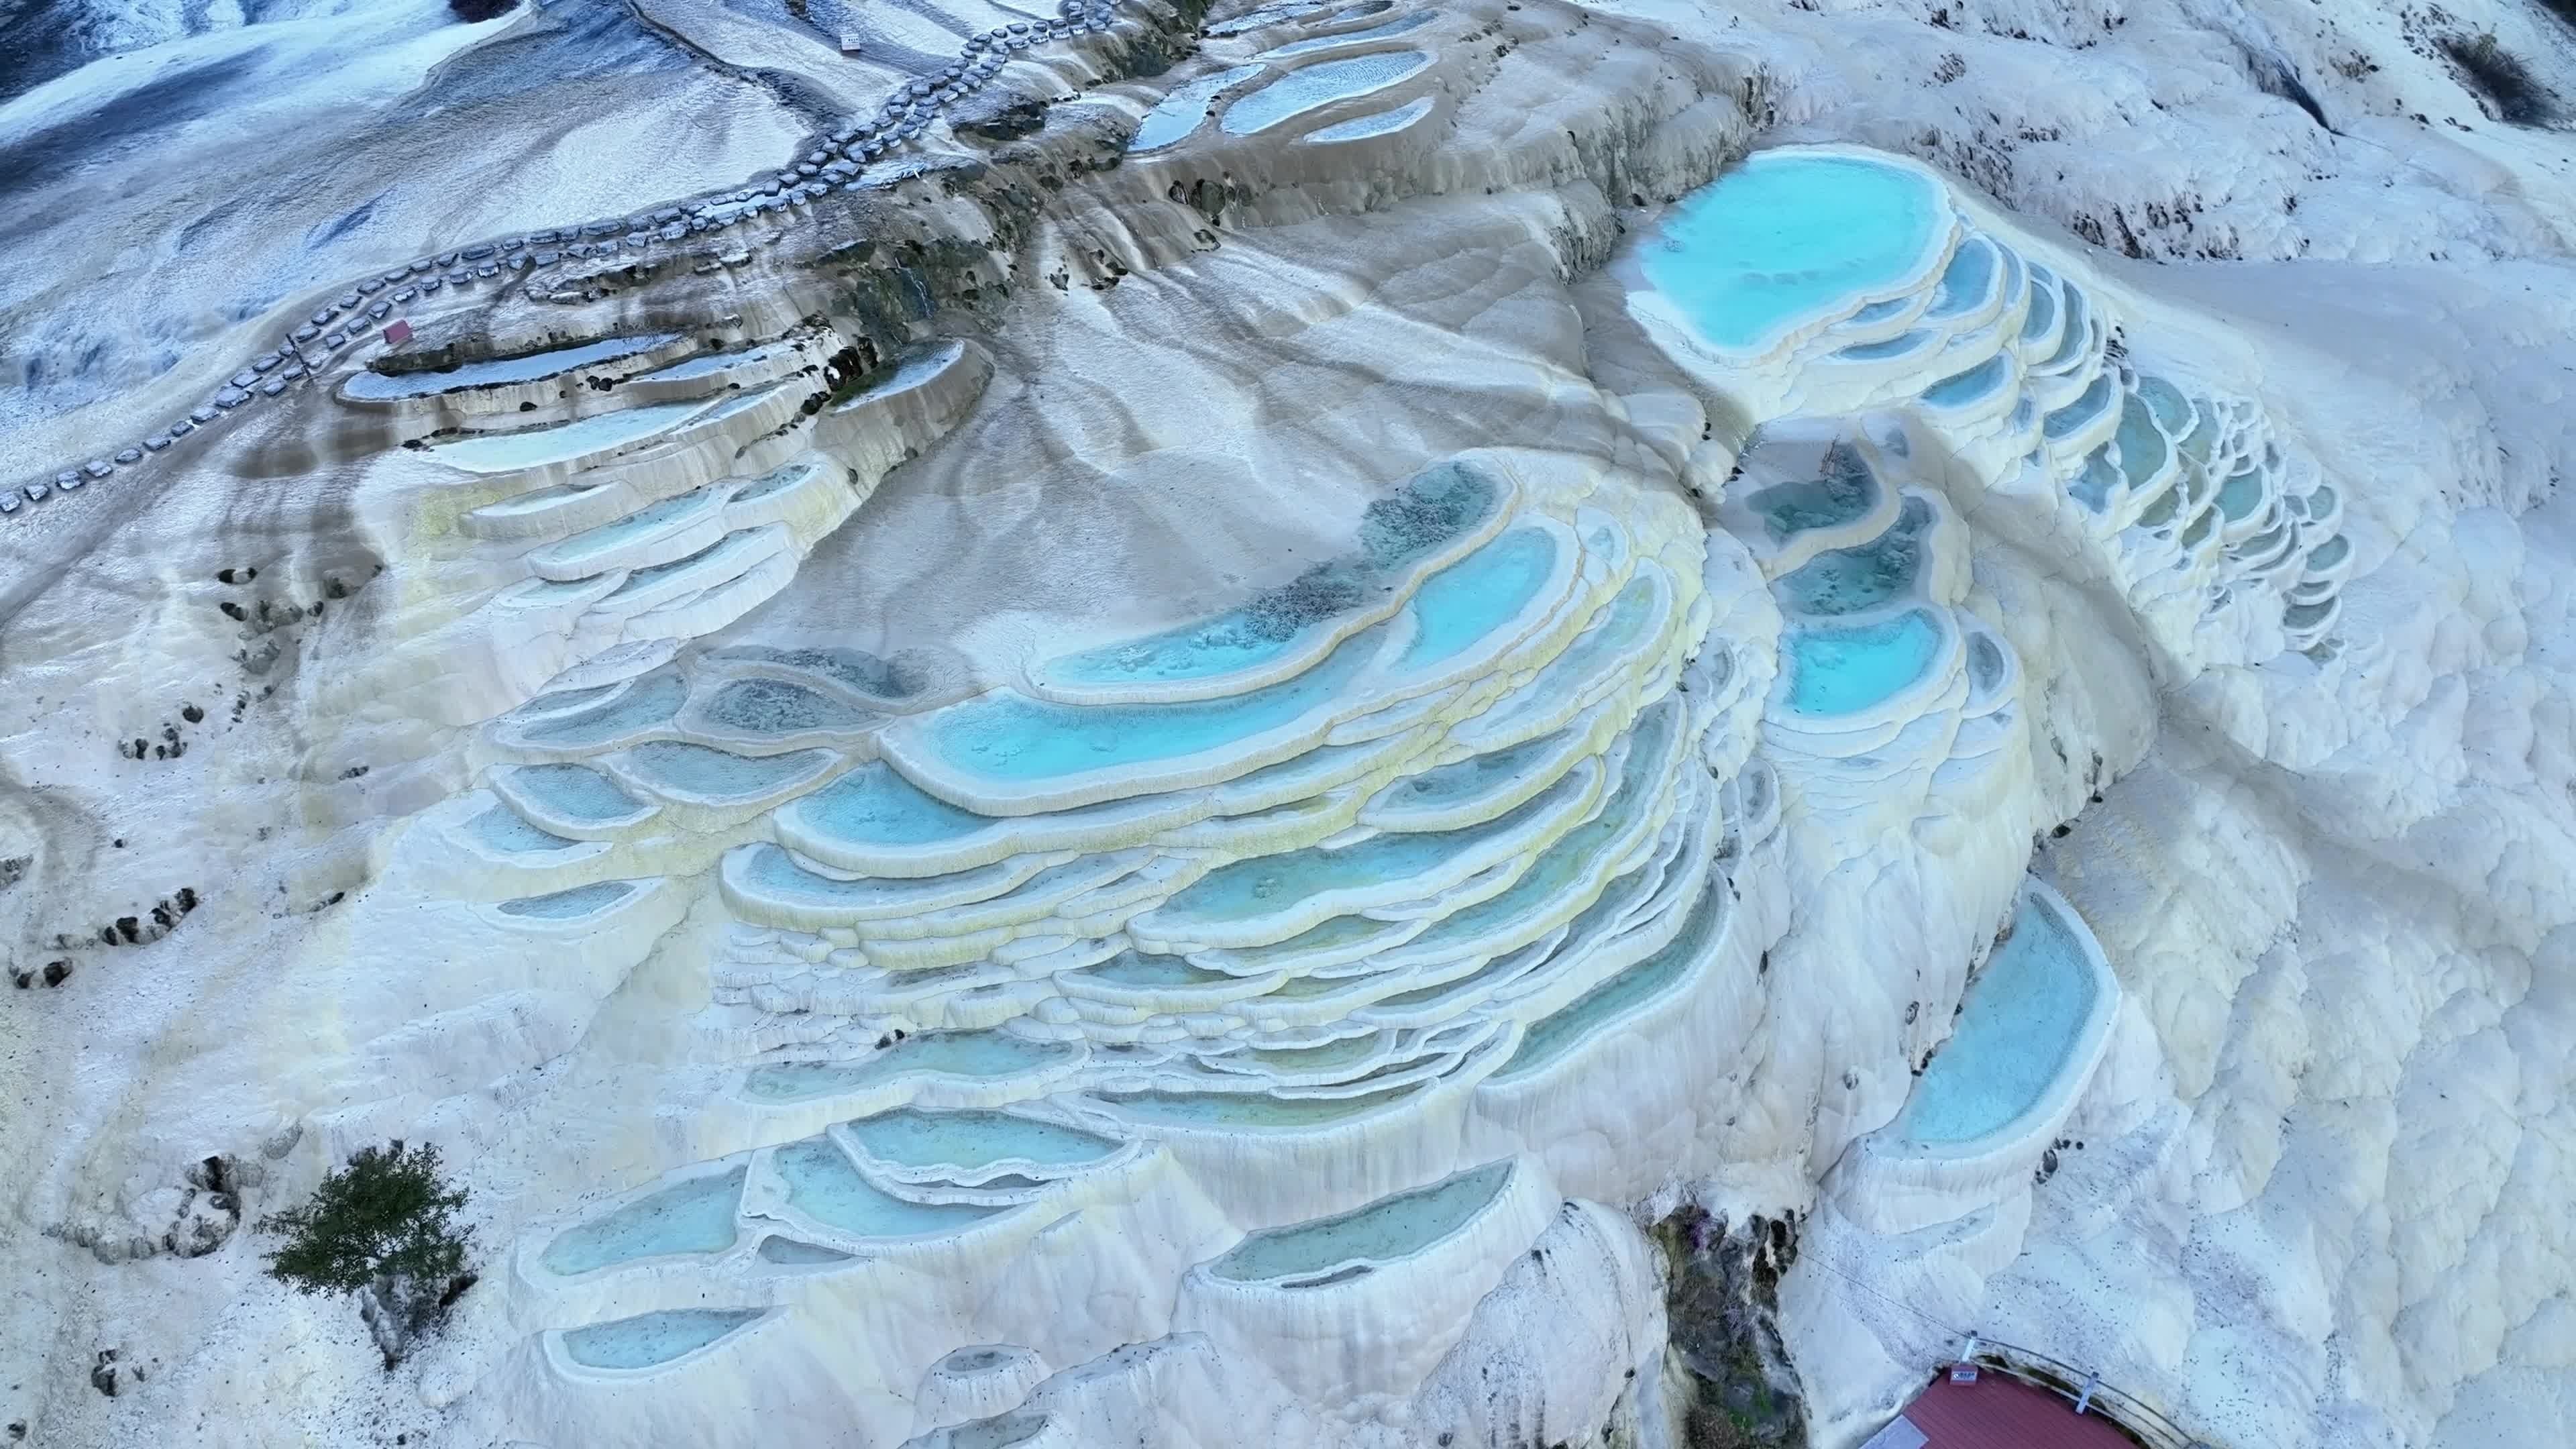 Spring water terraces form "blooming white flowers" in SW China's Shangri-La